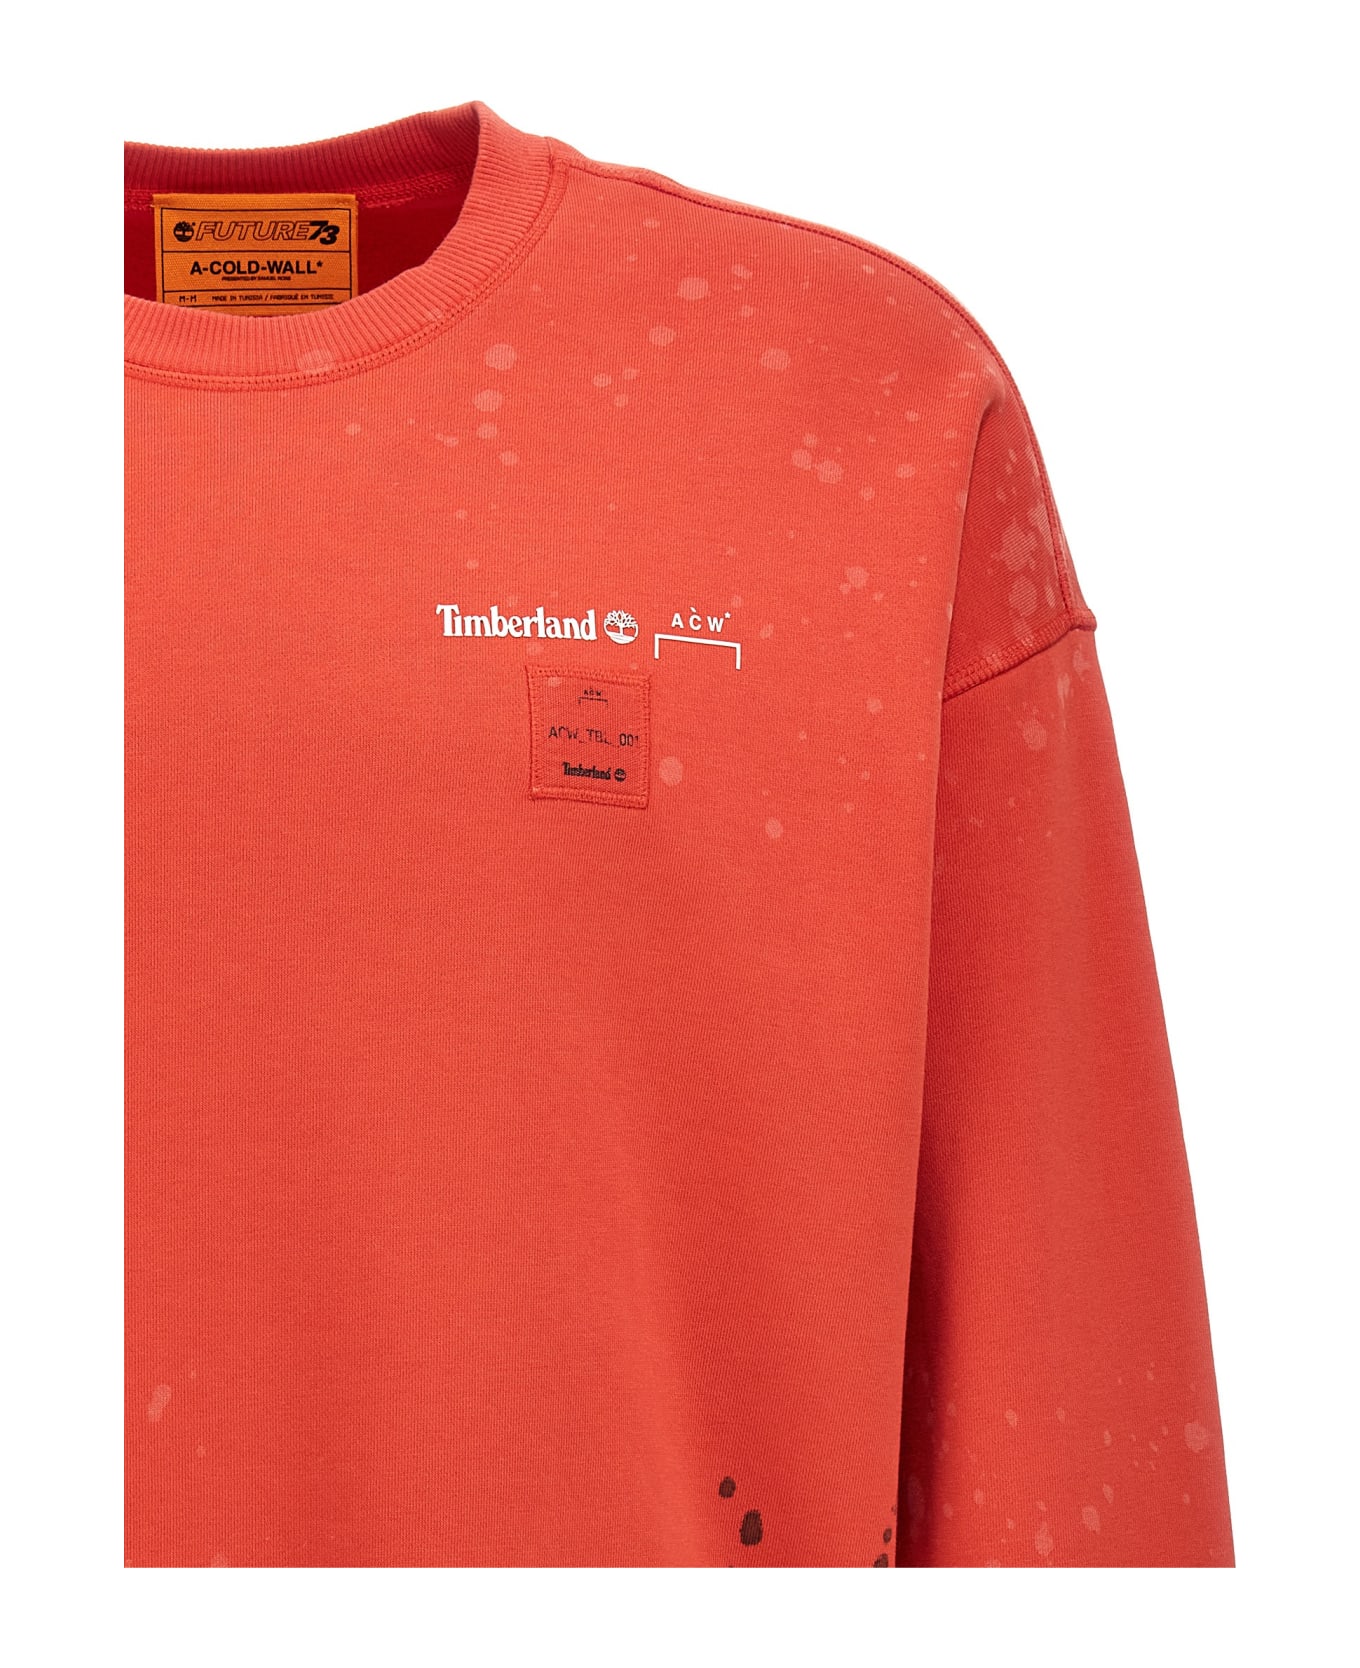 A-COLD-WALL Timberland A-cold-wall* Capsule Sweatshirt - Red フリース